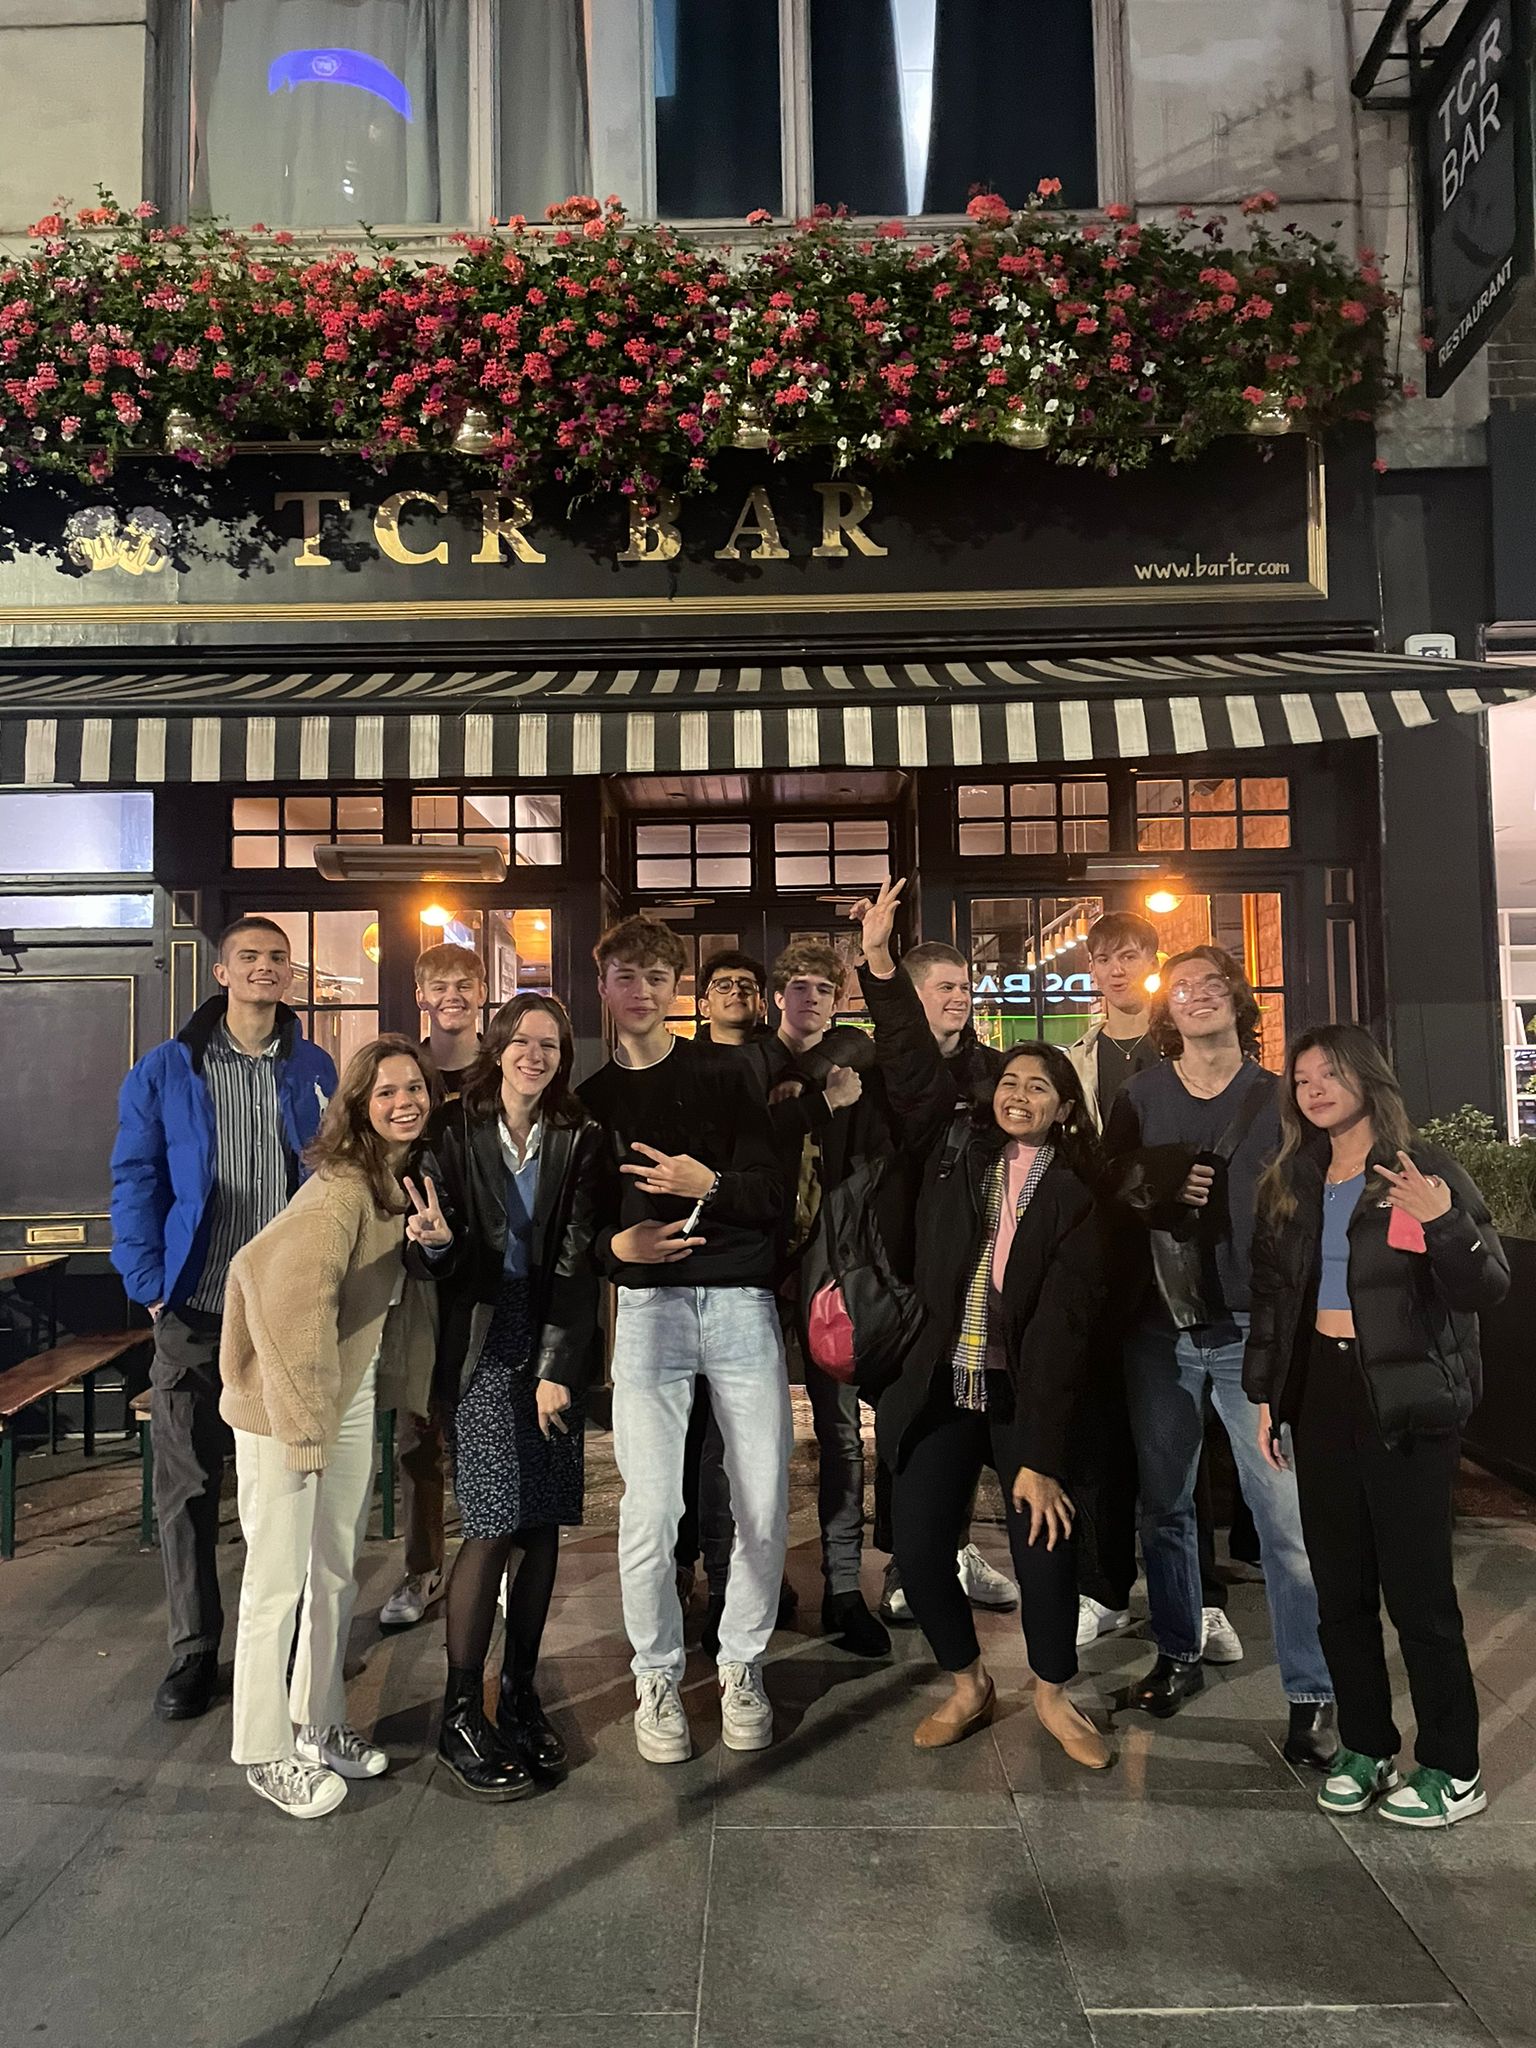 Image taken from EISPS Society's pub crawl, depicting twelve university-aged individuals standing outside the pub "TCR Bar" at night.